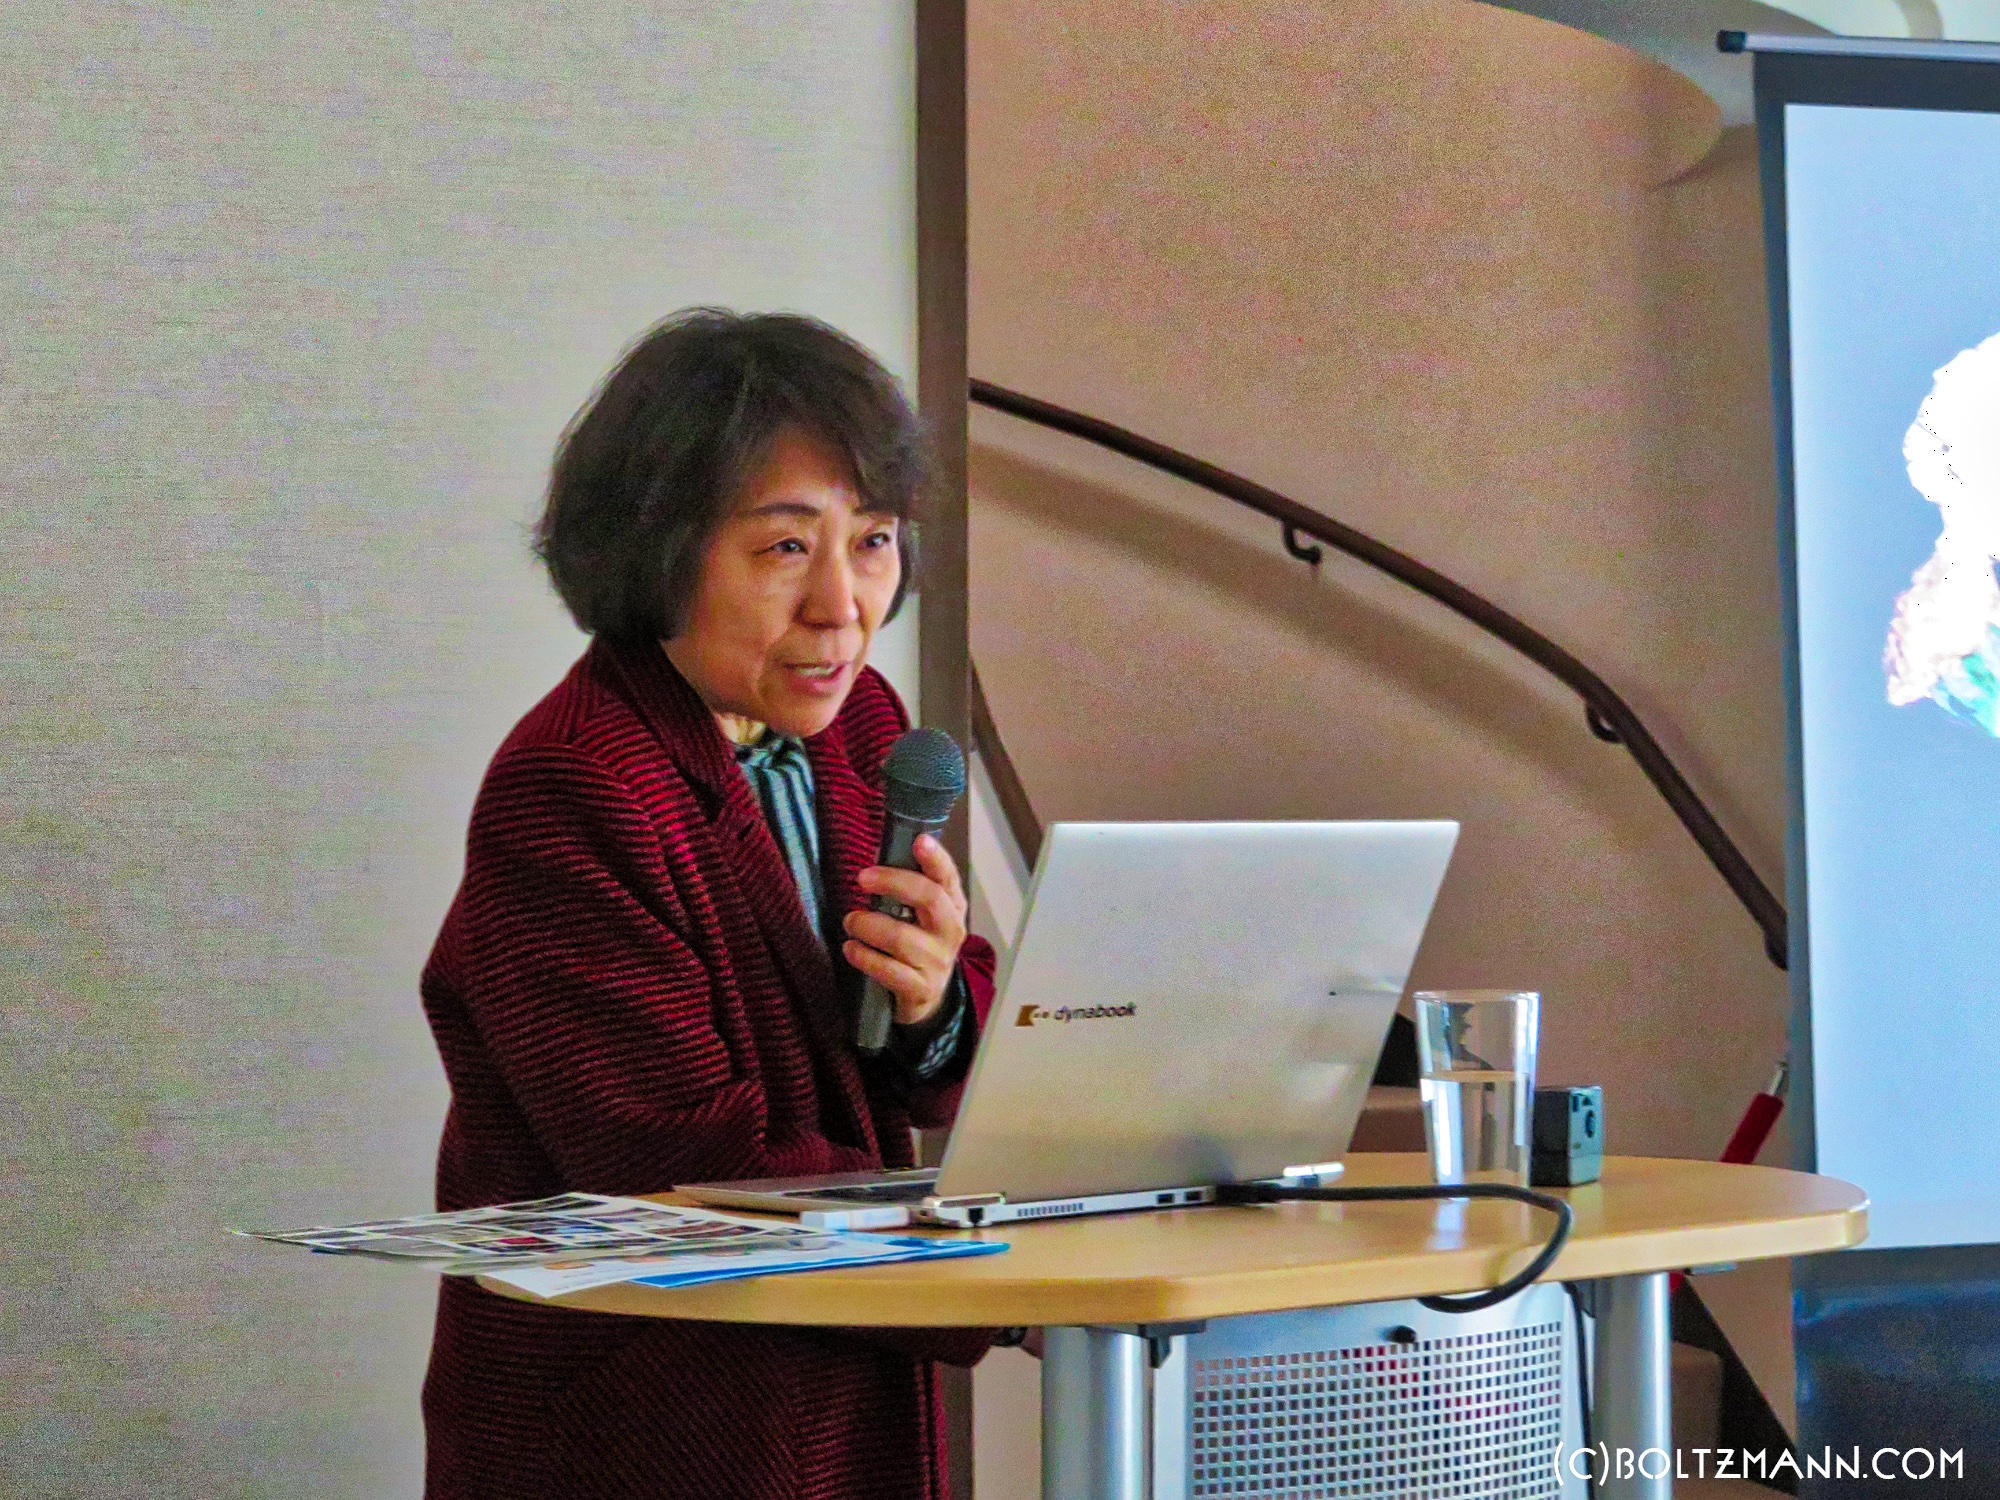 Tomoko Nakanishi Commissioner, Japan Atomic Energy Commission, President, Japan Society for Nuclear and Radiochemical Sciences, Tokyo University Professor